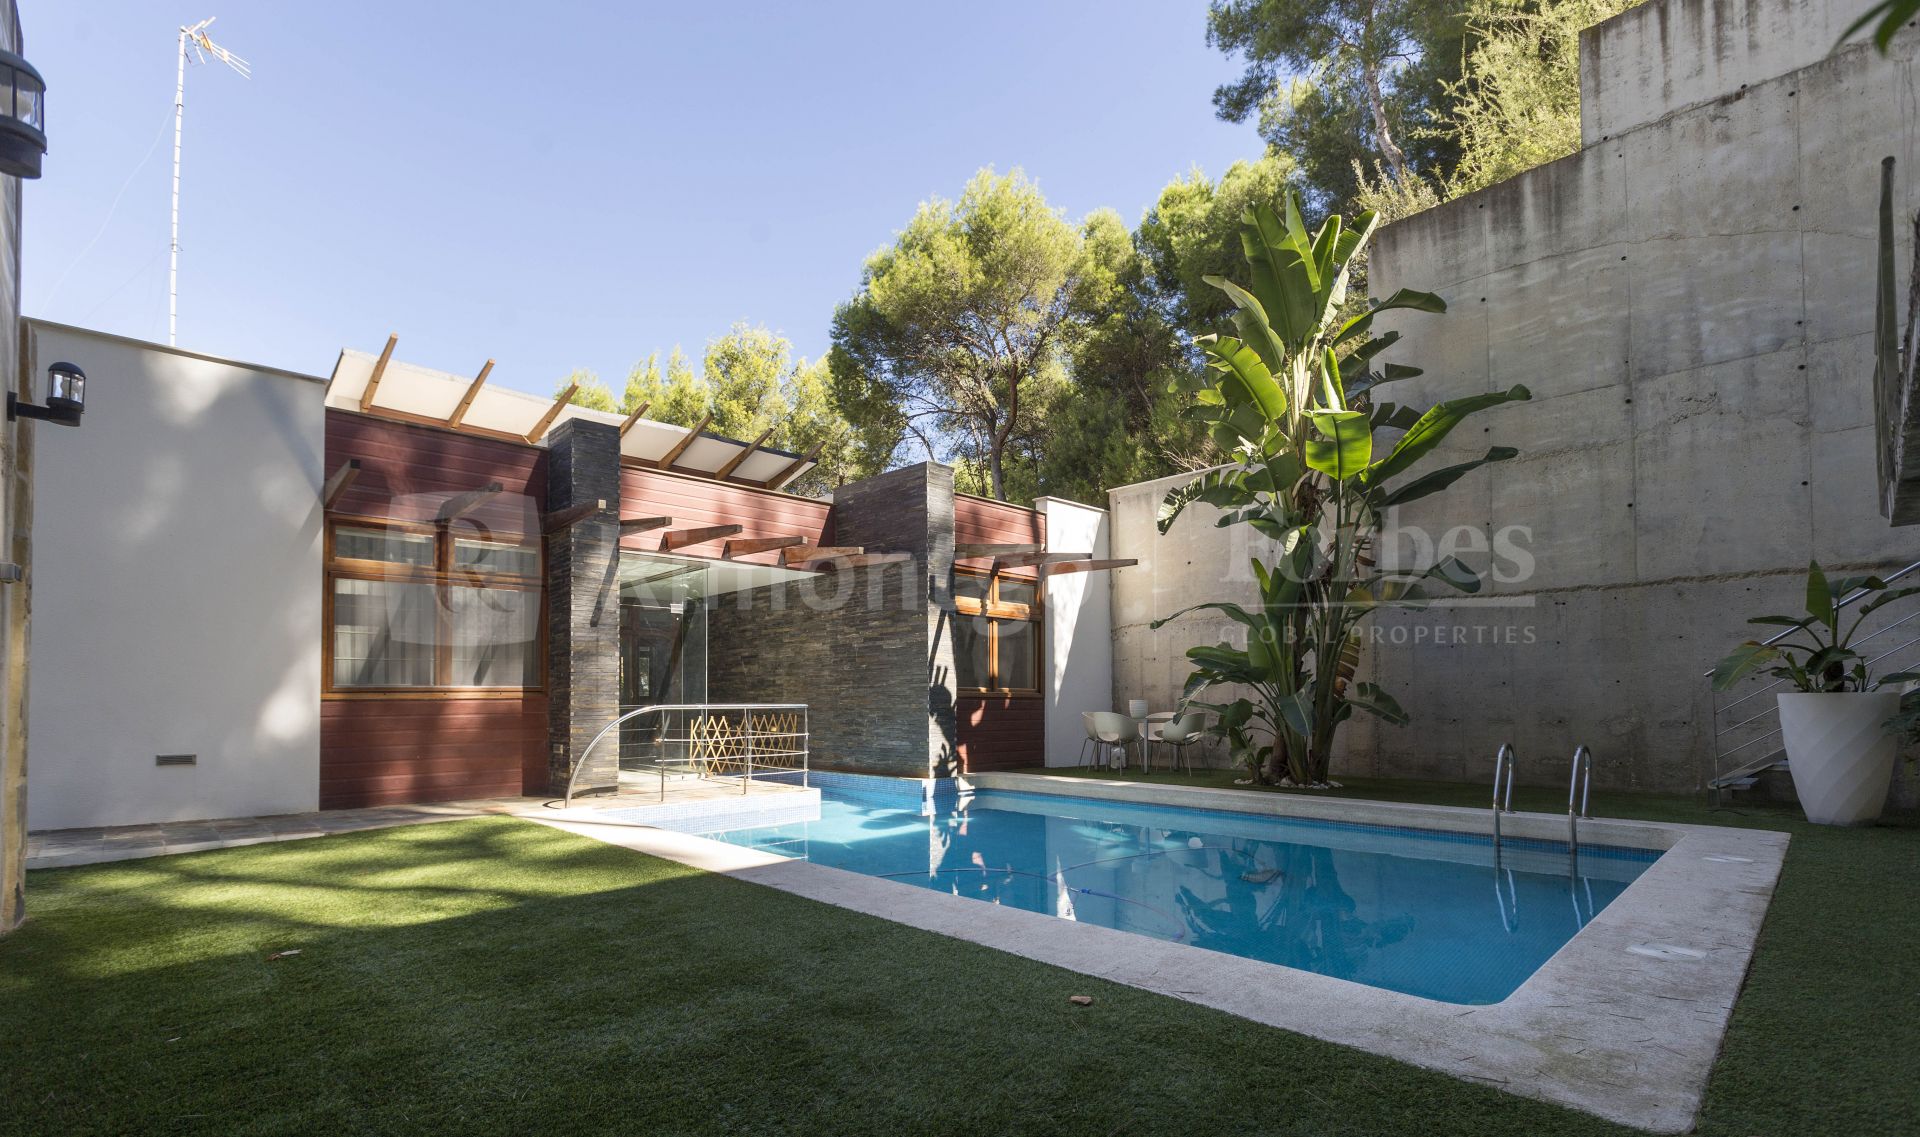 A villa with a difference, this ecological home with lots of unique modern features is located on a private plot in the select urbanization of El Bosque Golf near Valencia - an ideal house for those who prize style and individuality in a property.